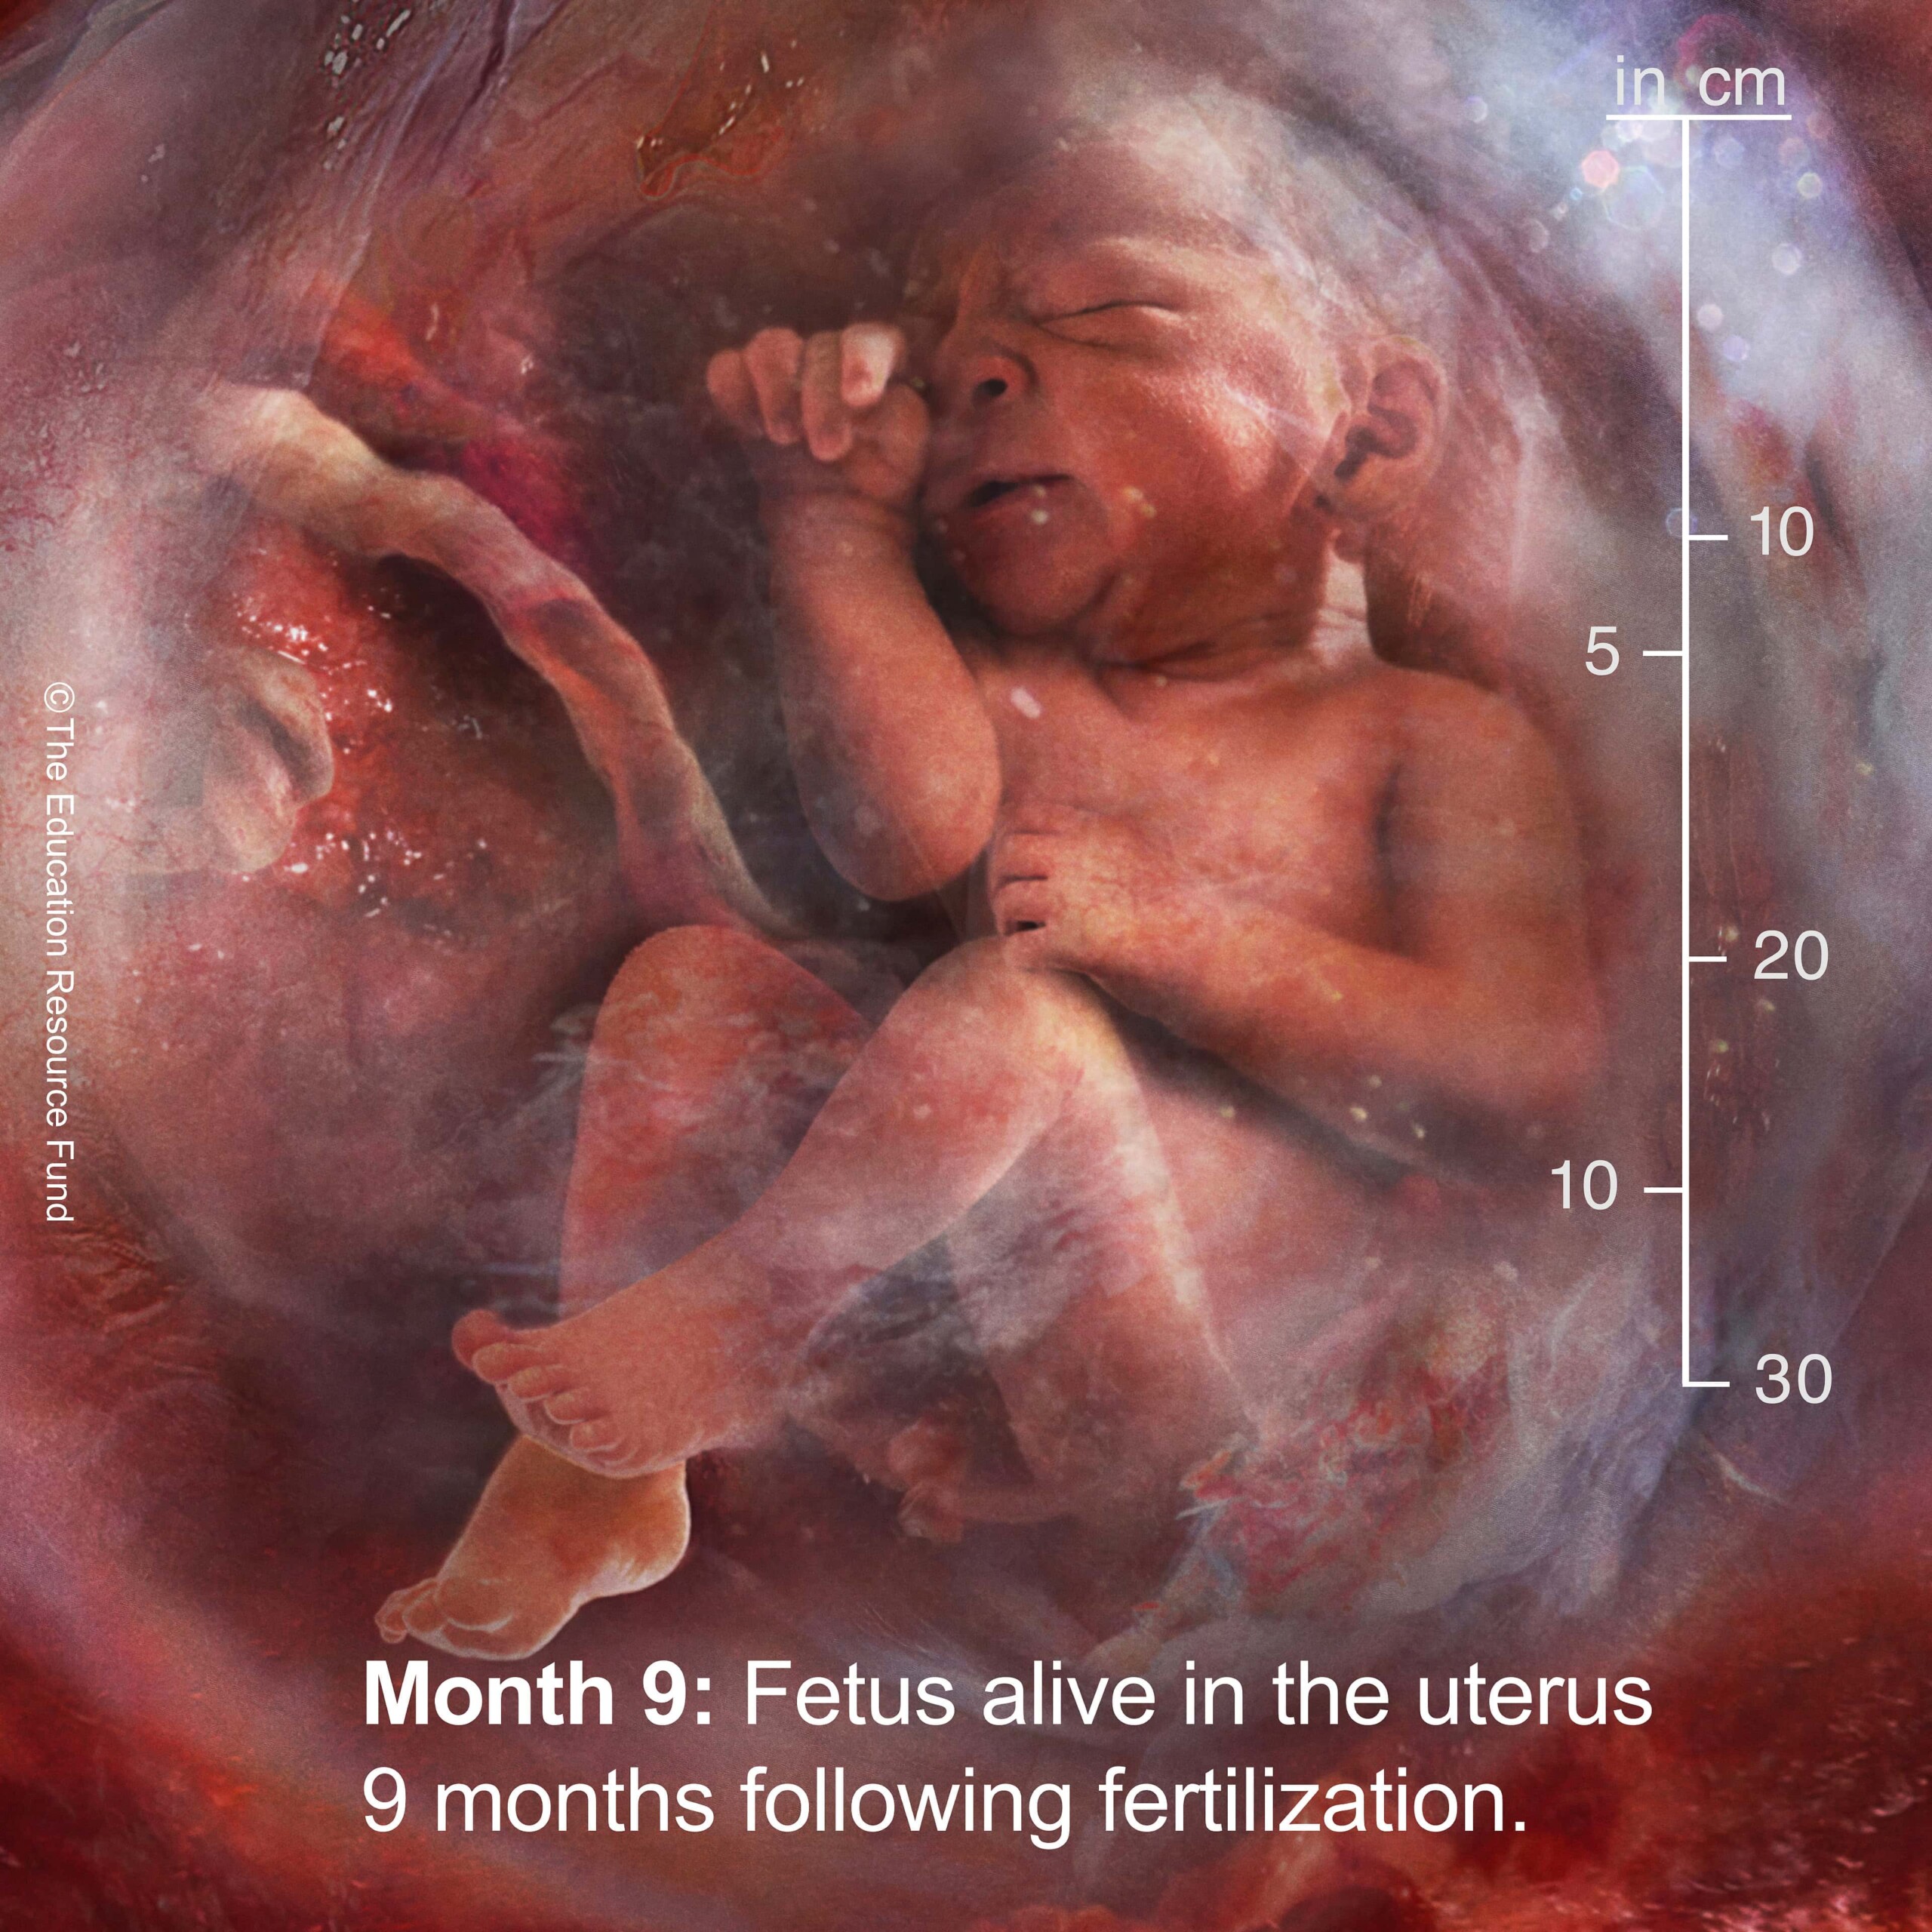 Month 9: Embryo alive in the uterus 9 months following fertilization